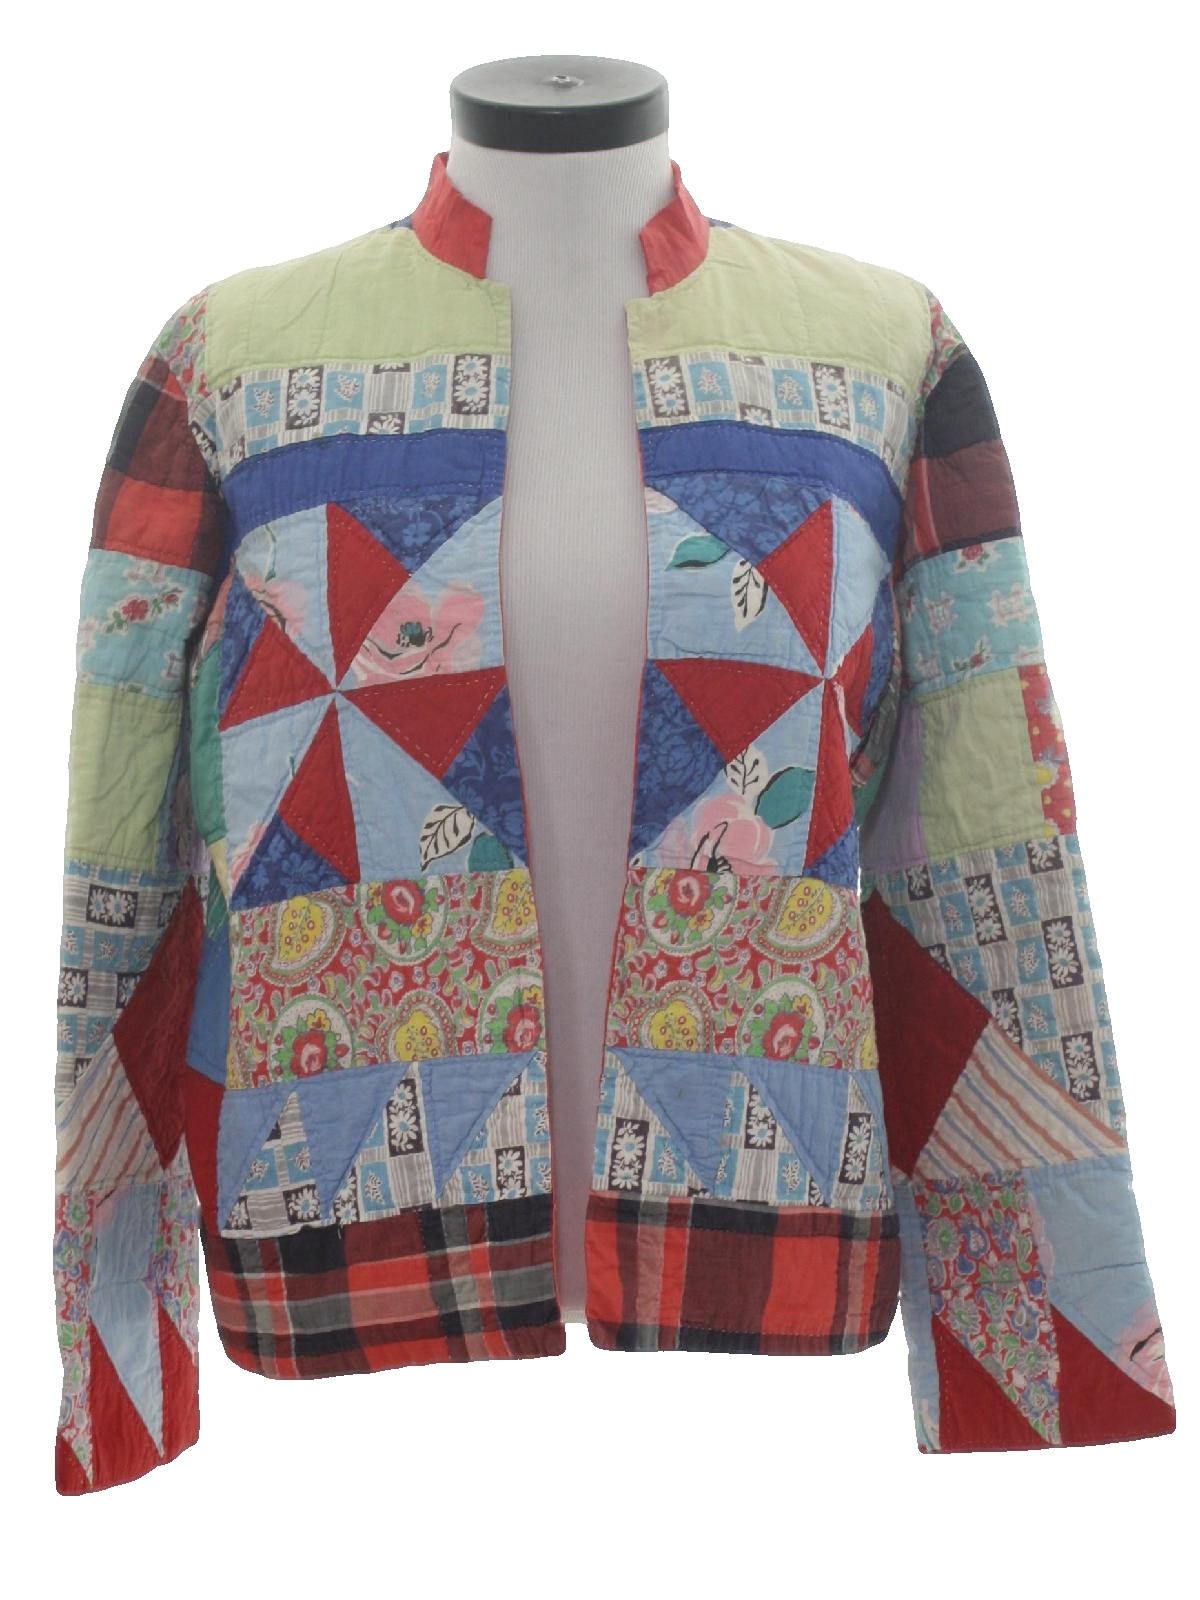 1970's Retro Jacket: 70s -Home Sewn- Womens multicolored patchwork ...